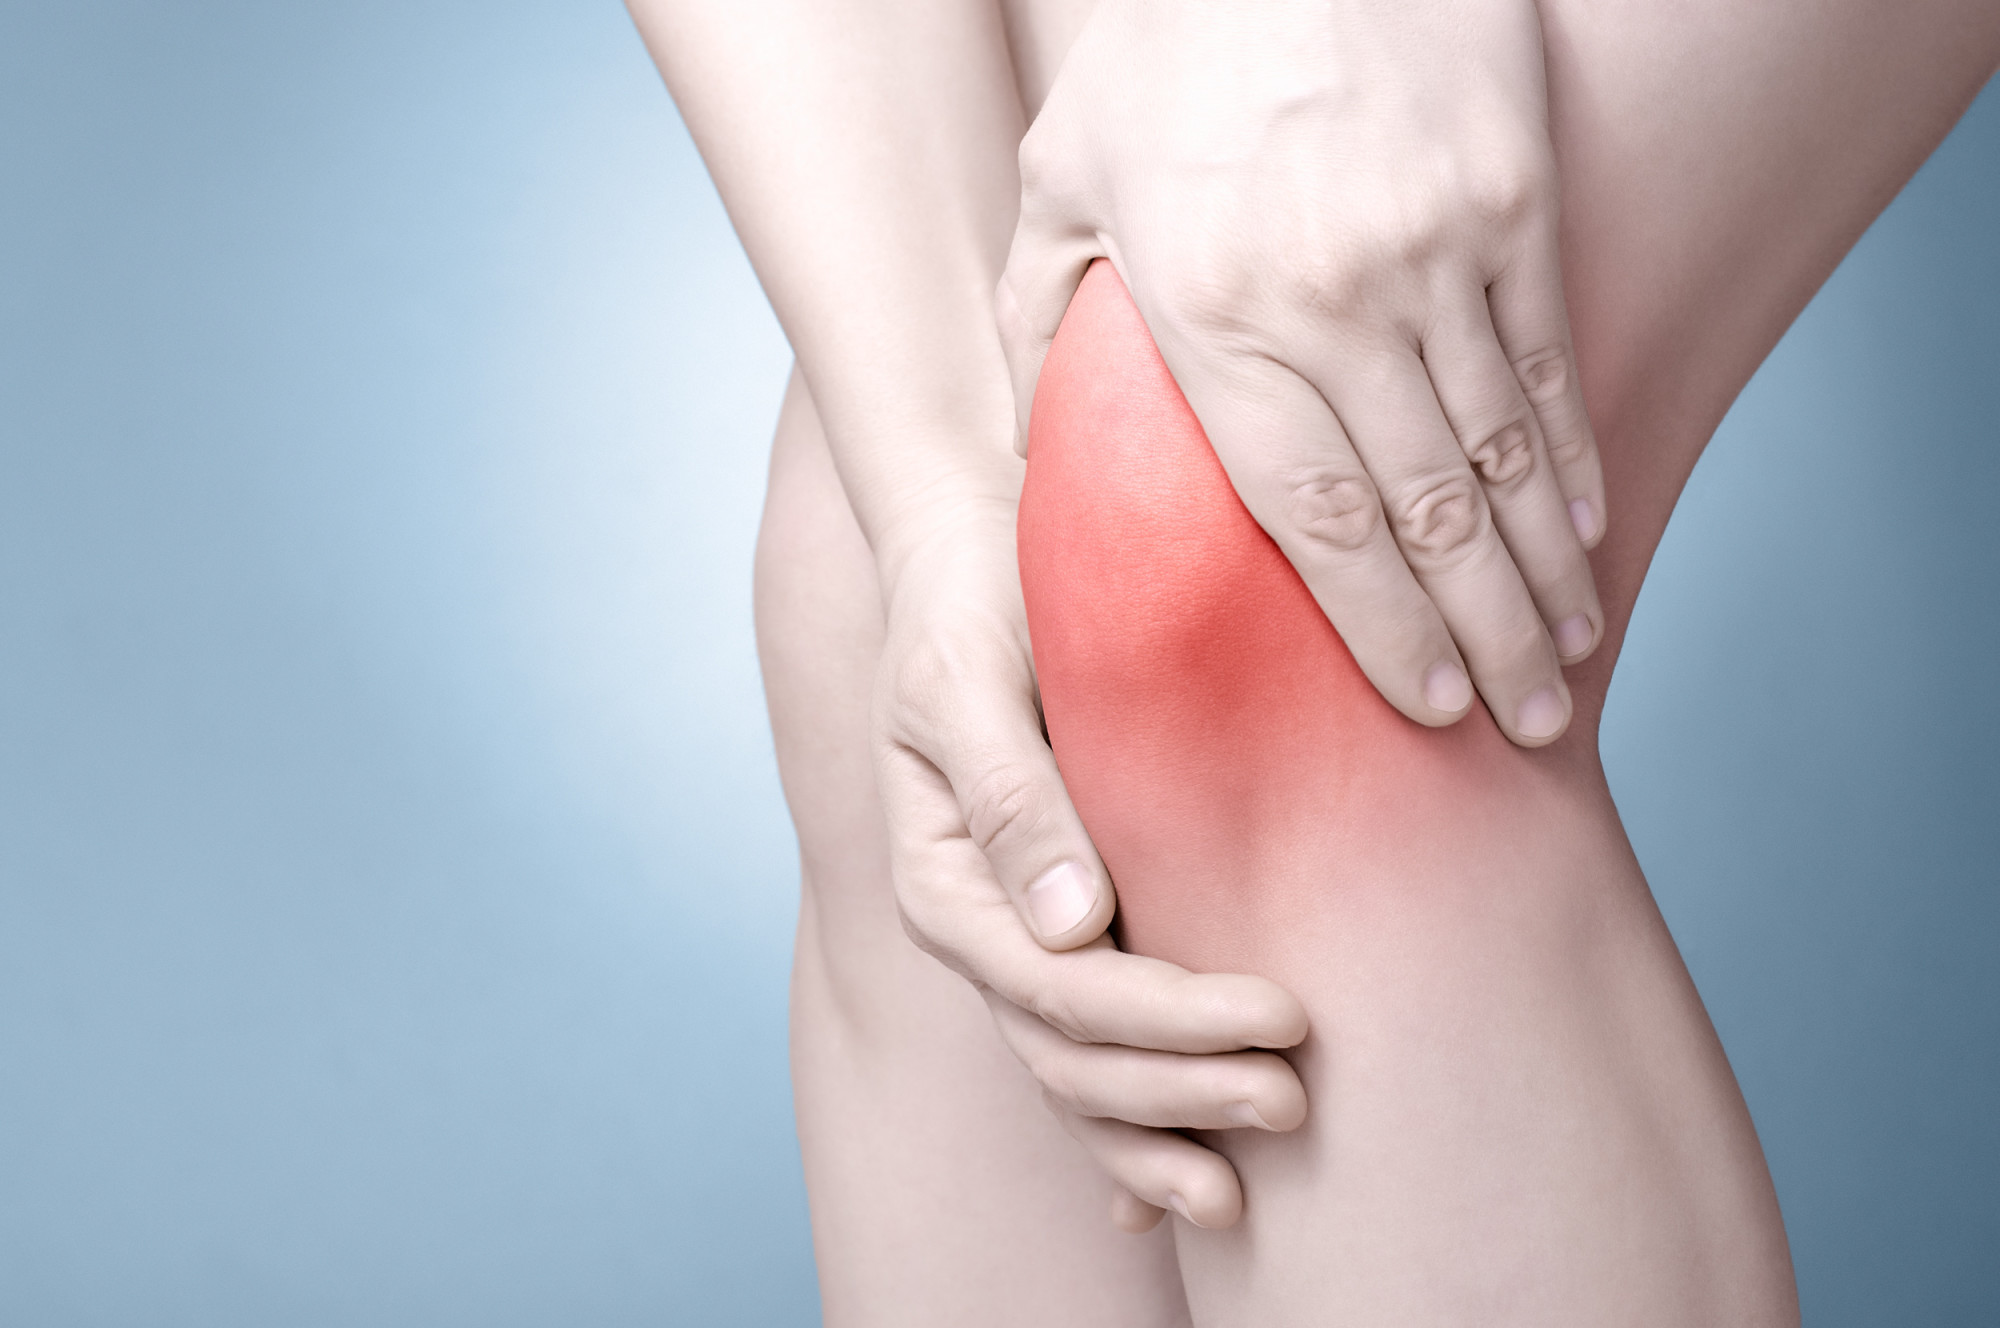 Home Physical Therapy for Knee Pain